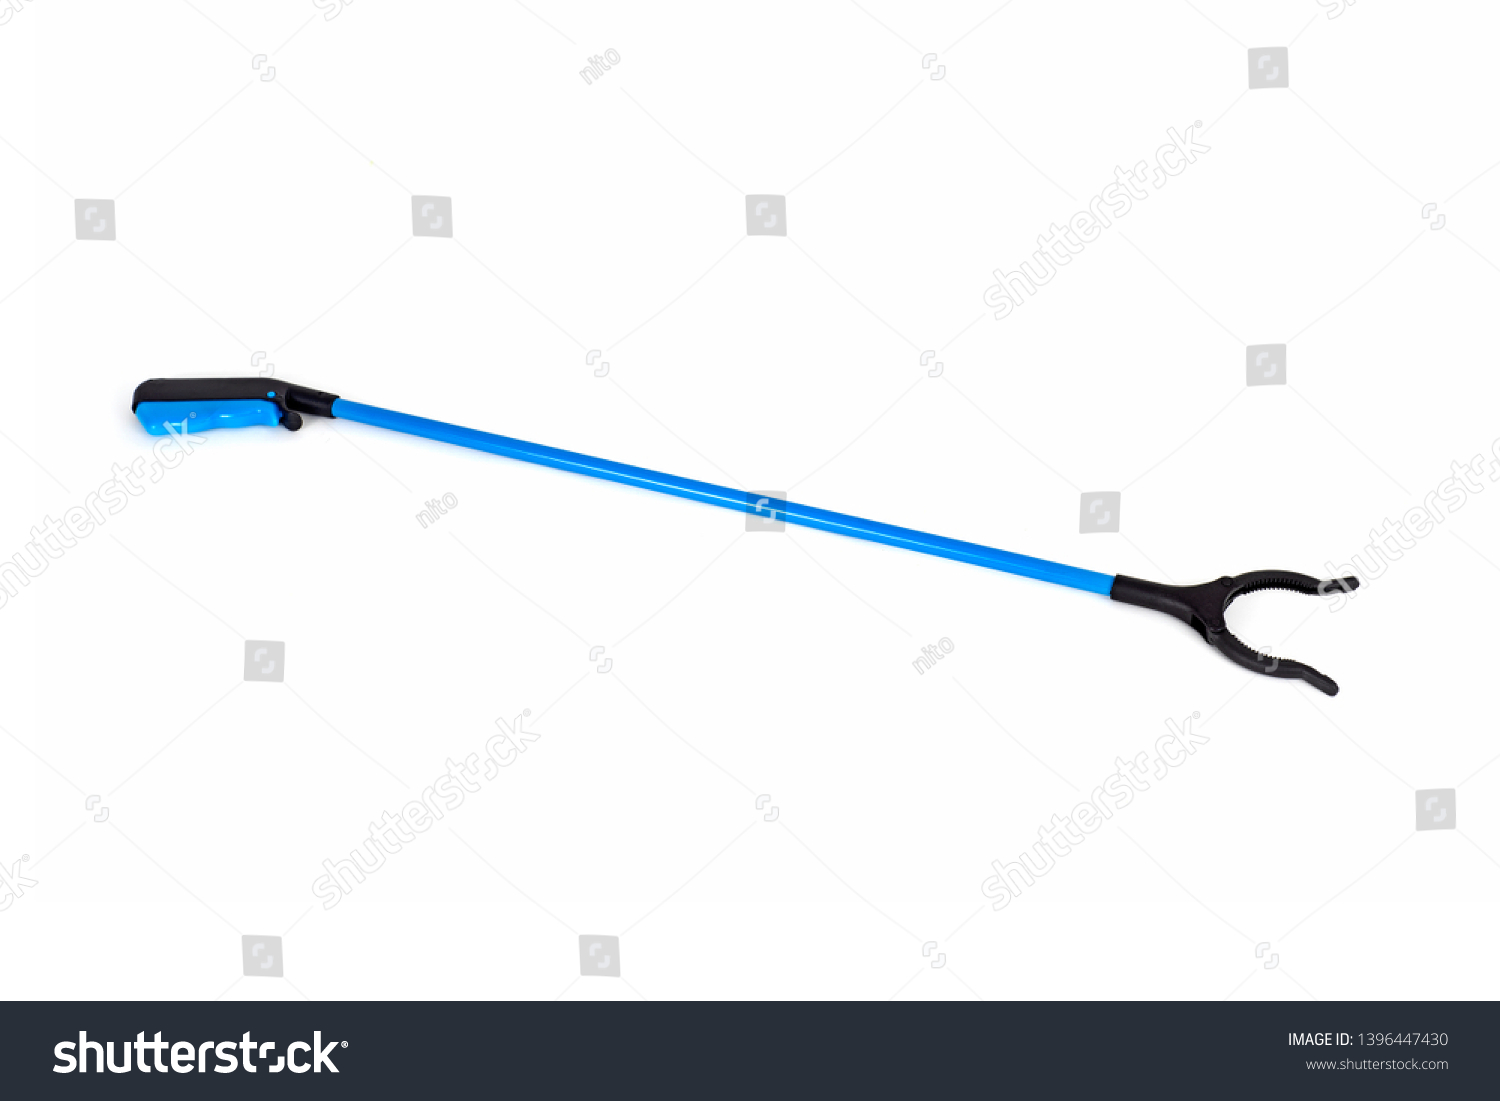 a blue and black reach extender on a white background #1396447430